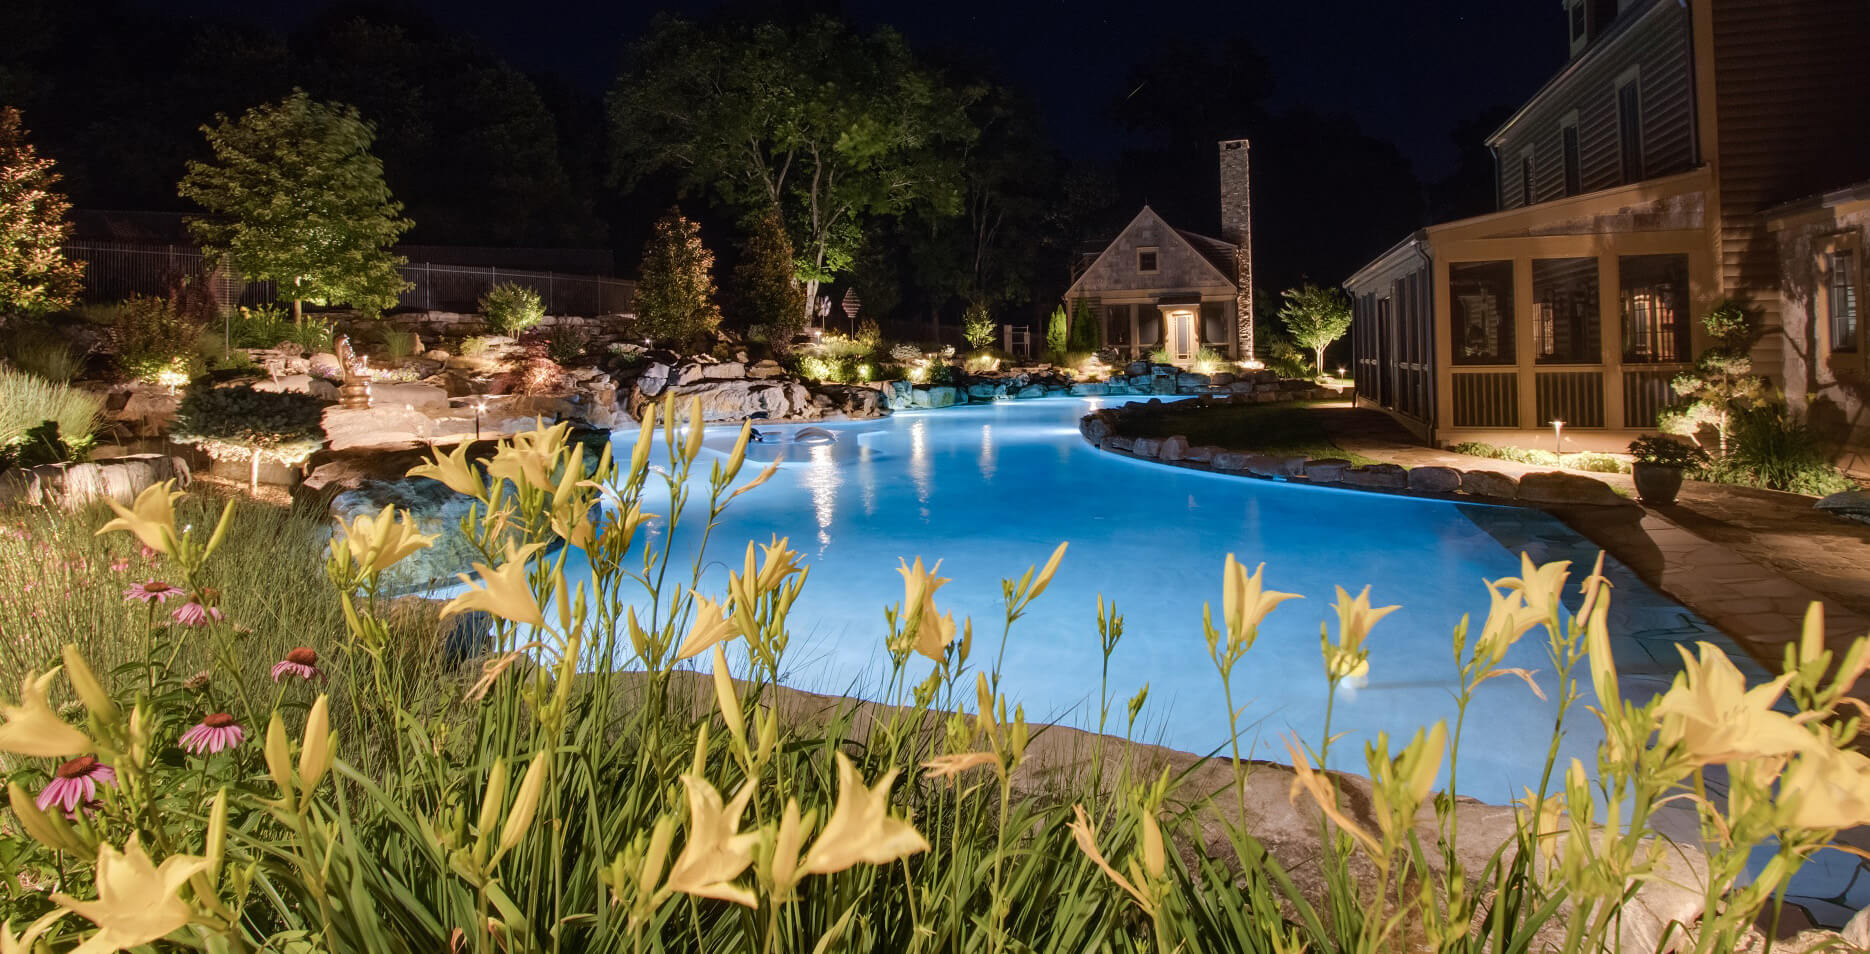 Pool and landscape lighting